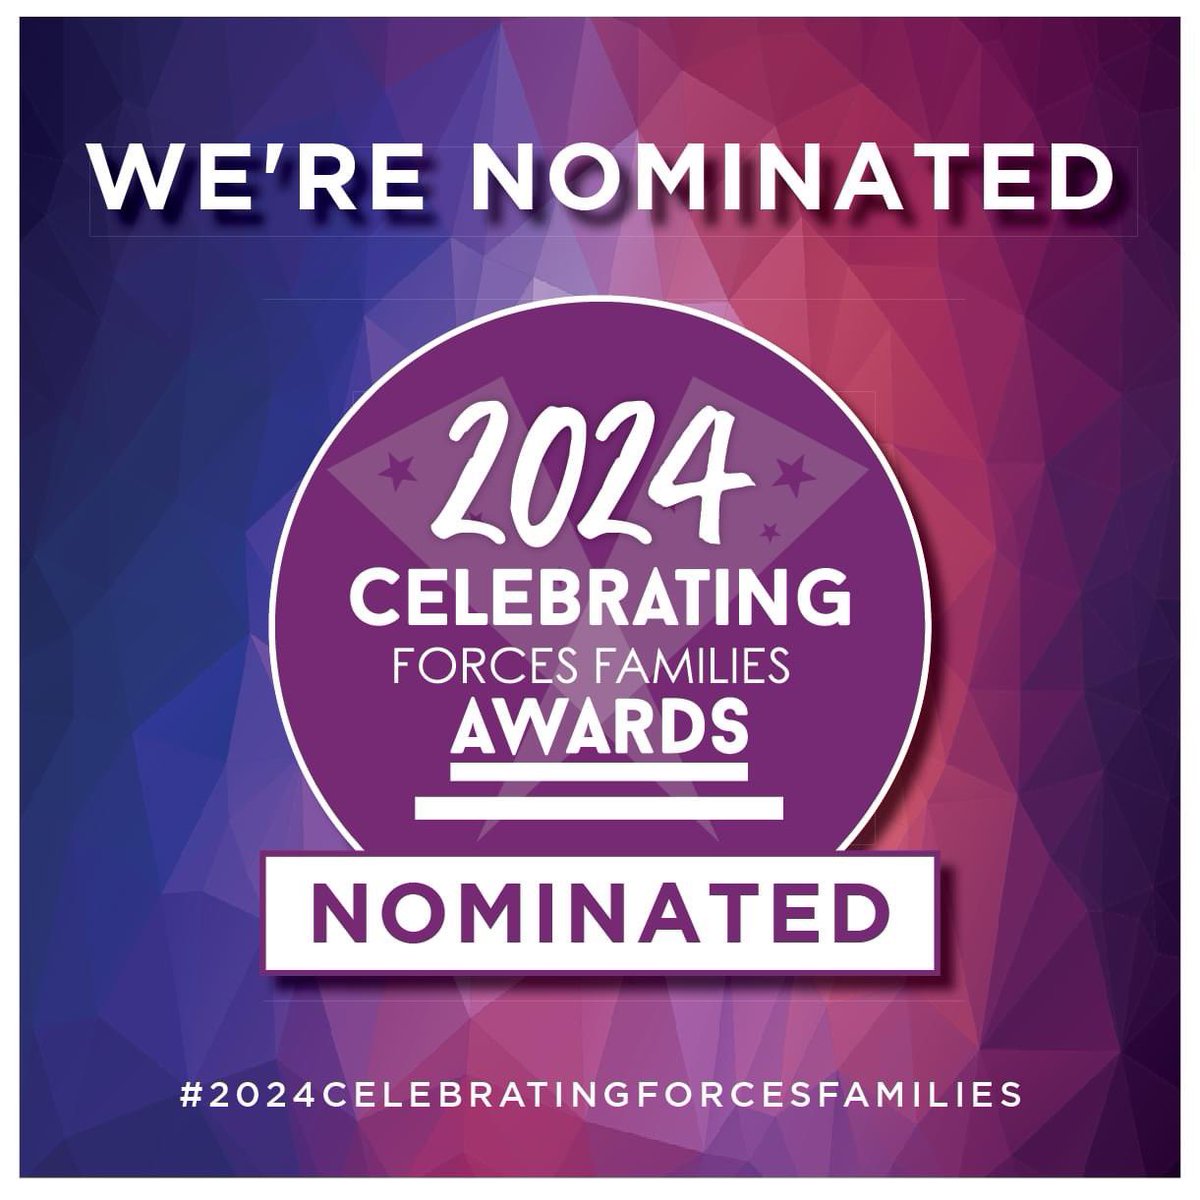 We're delighted to announce that we have been nominated as Family Charity of the Year at the @cffawards! We are so proud of the work we do across the UK and overseas supporting women in the military community through music-making #2024celebratingforcesfamilies